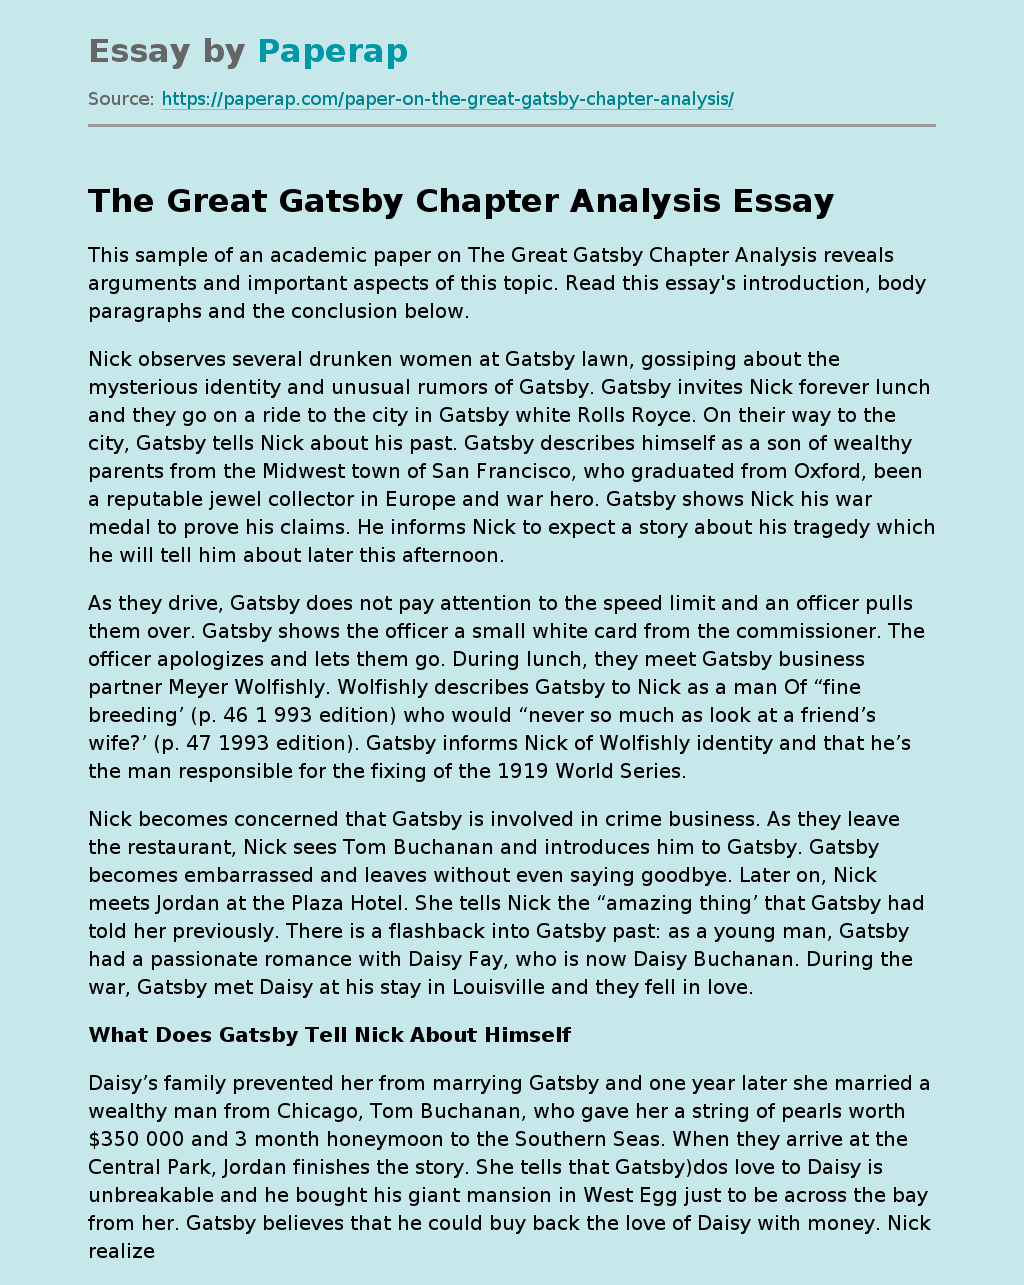 The Great Gatsby Chapter Analysis